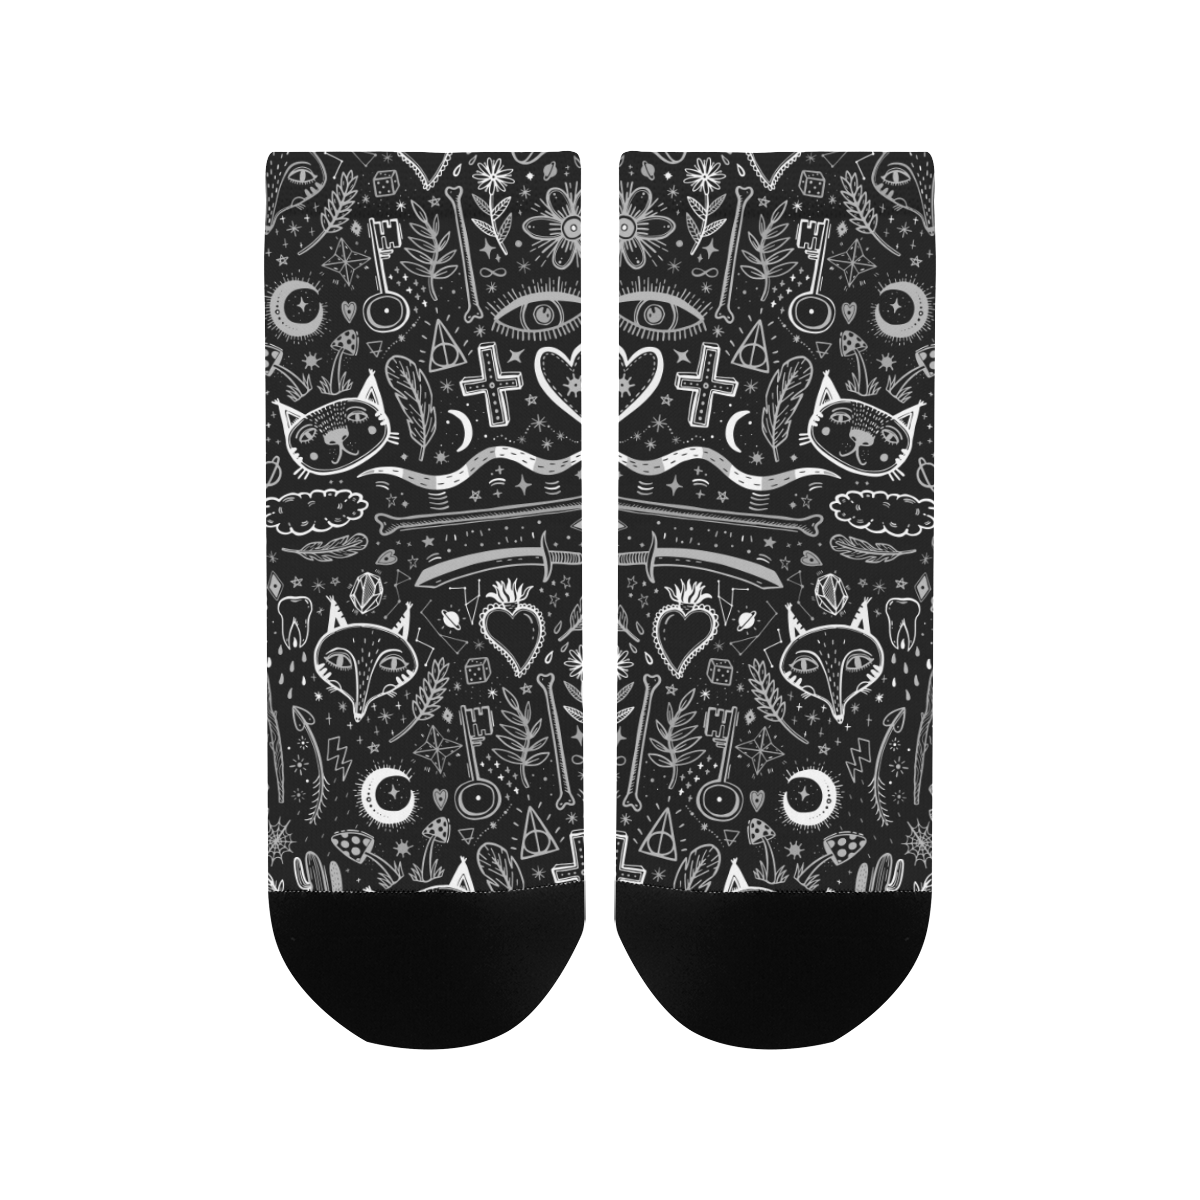 Funny Nature Of Life Sketchnotes Pattern 4 Women's Ankle Socks